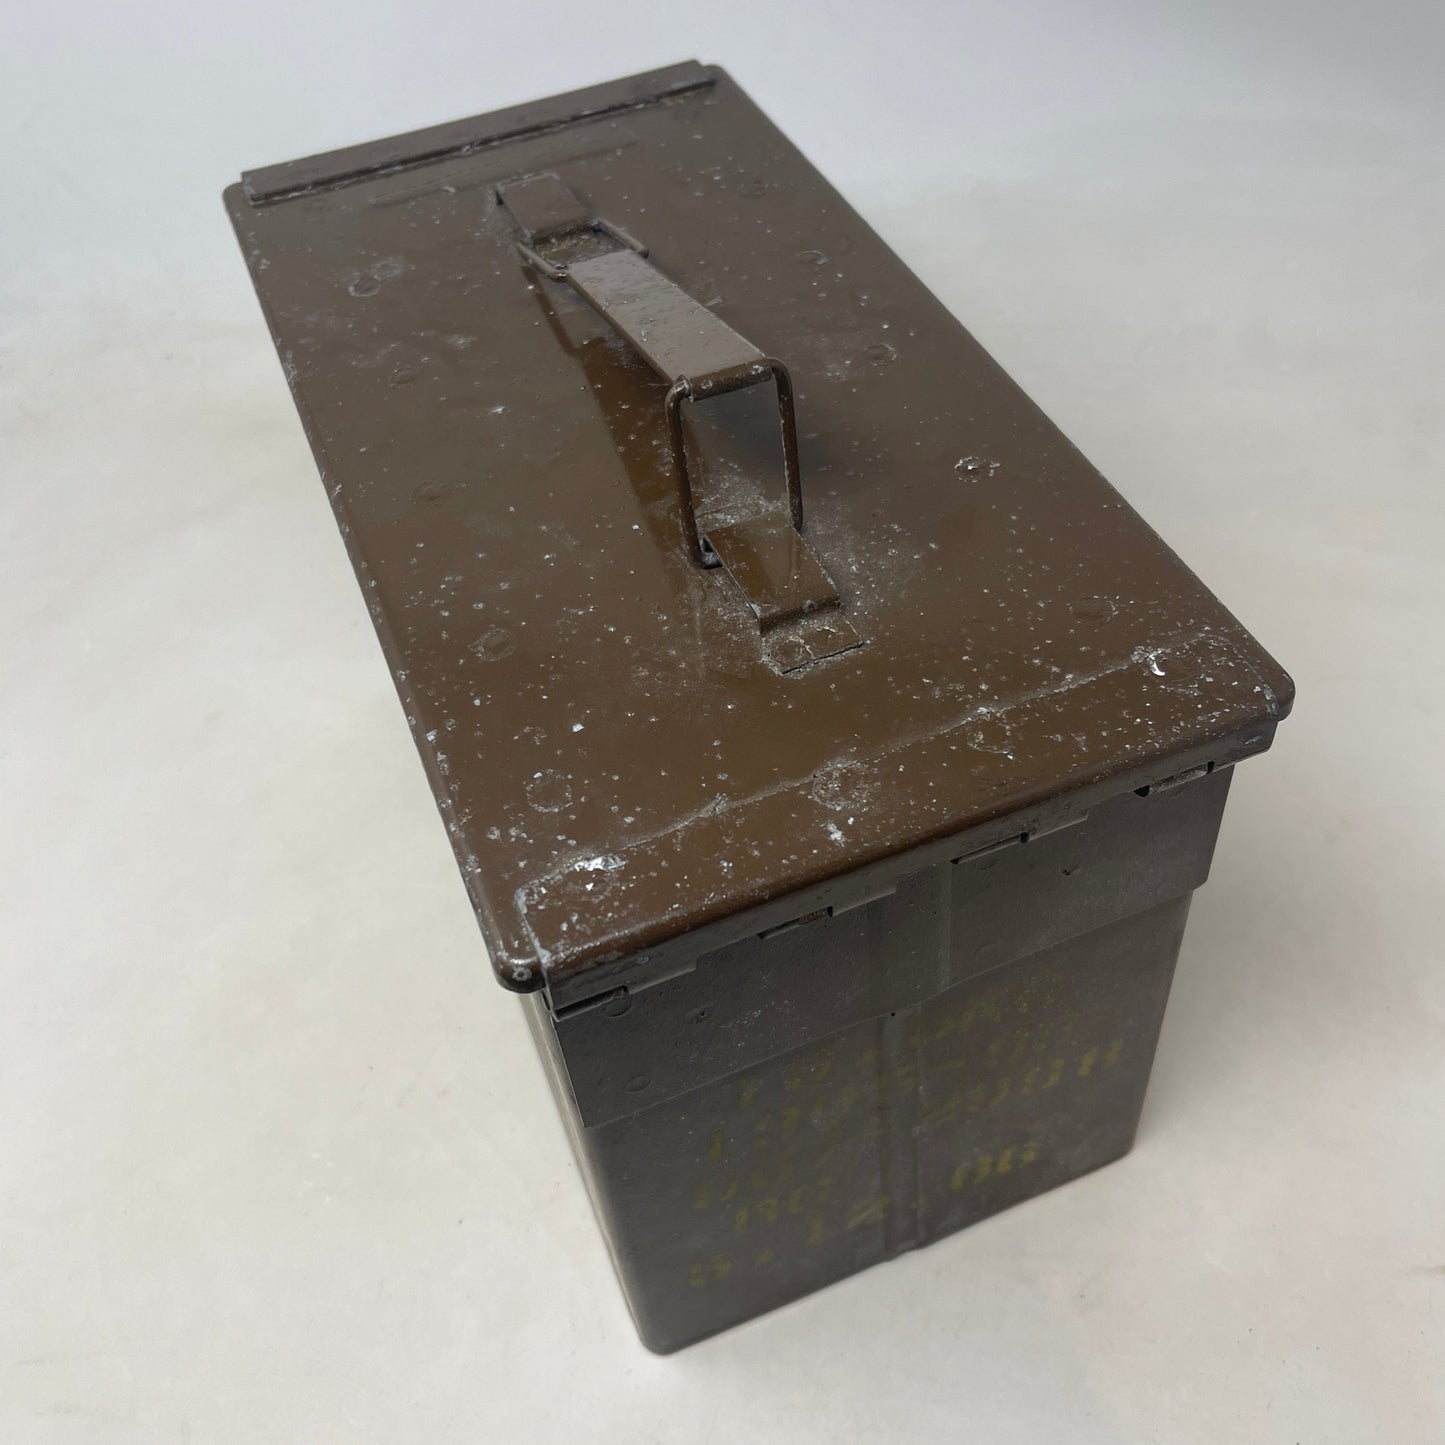 British H83 Ammunition Box for 5.56mm in Bandoliers